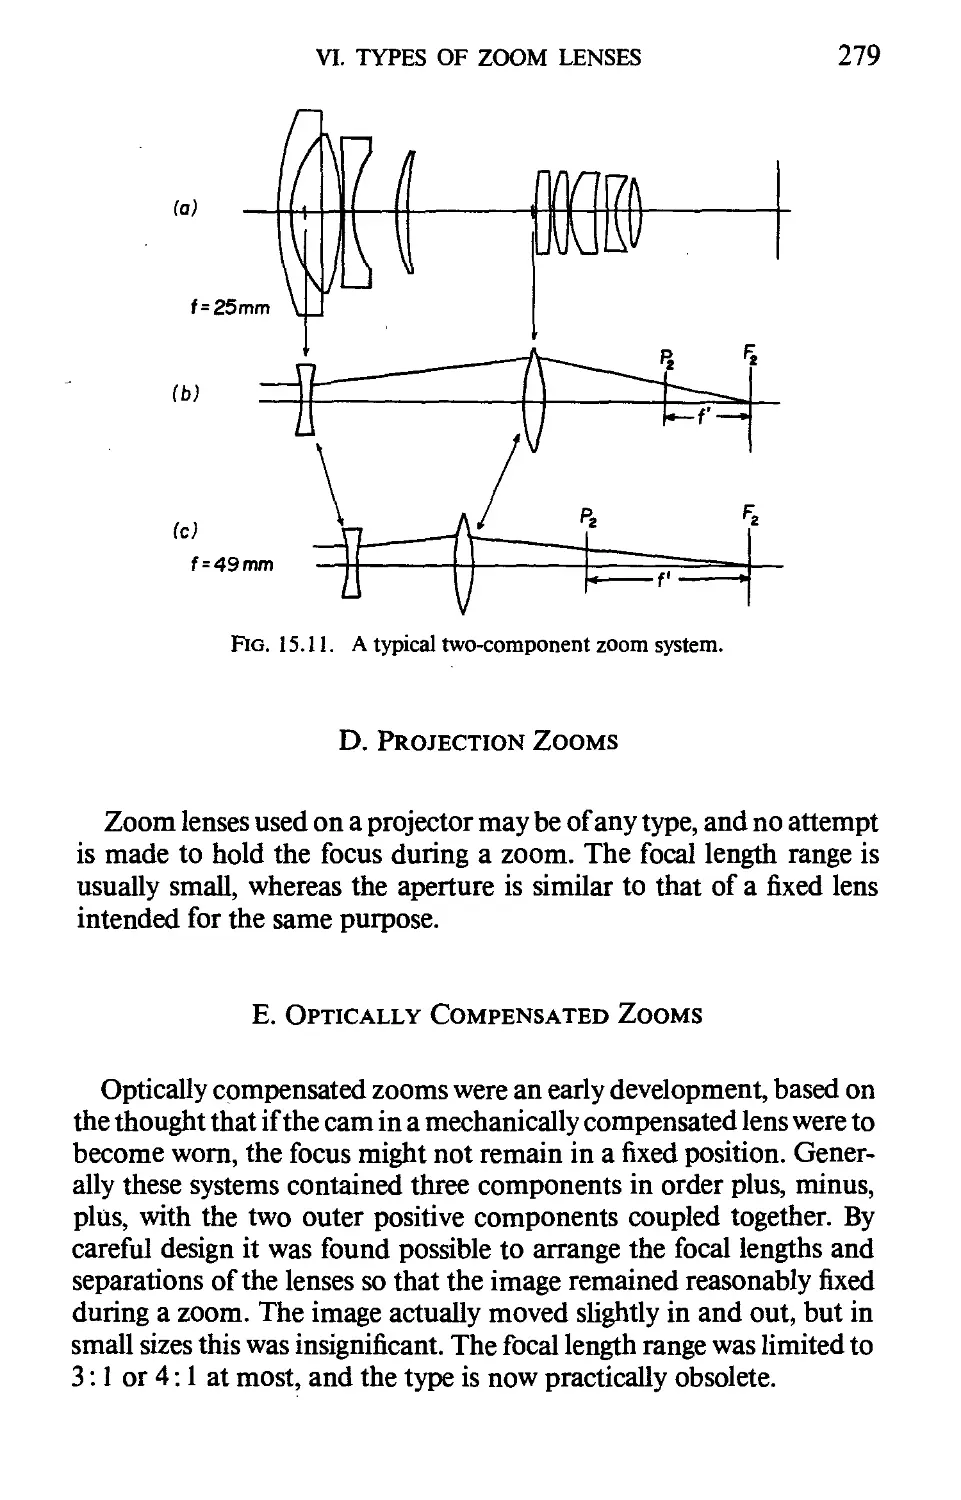 D. Projection Zooms
E. Optically Compensated Zooms